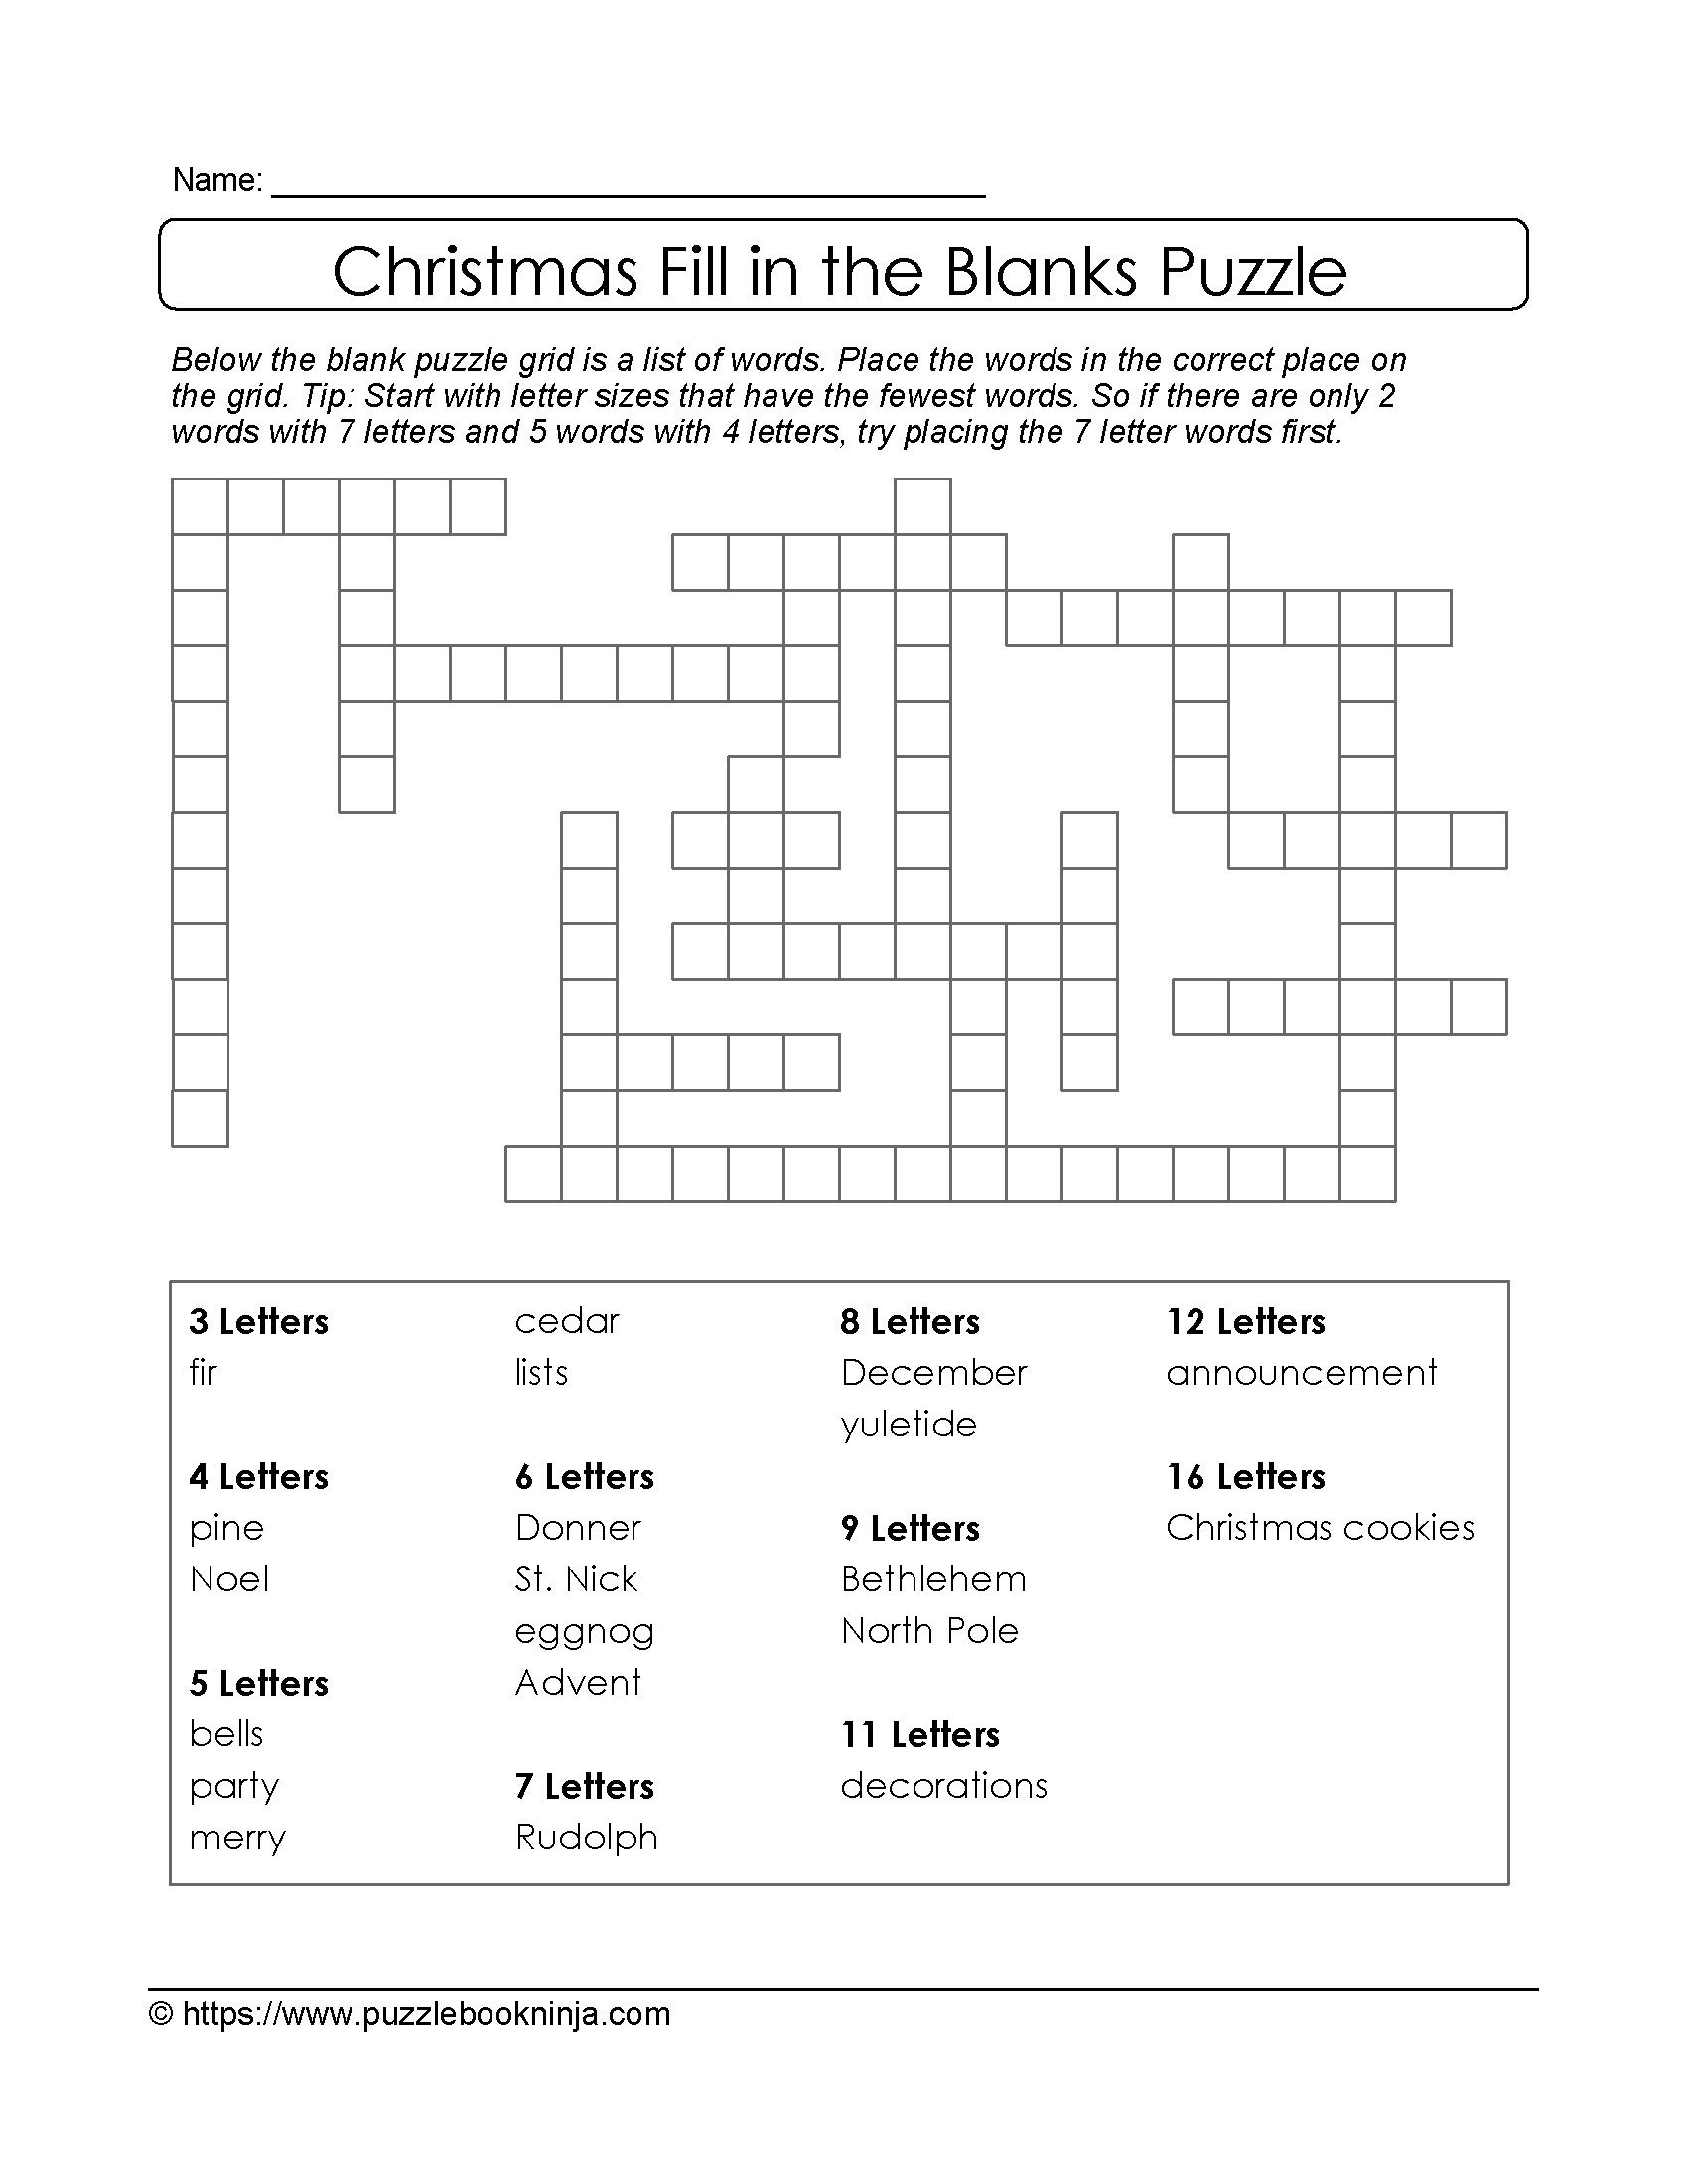 Christmas Printable Puzzle. Free Fill In The Blanks. | Christmas - Printable Russian Crosswords